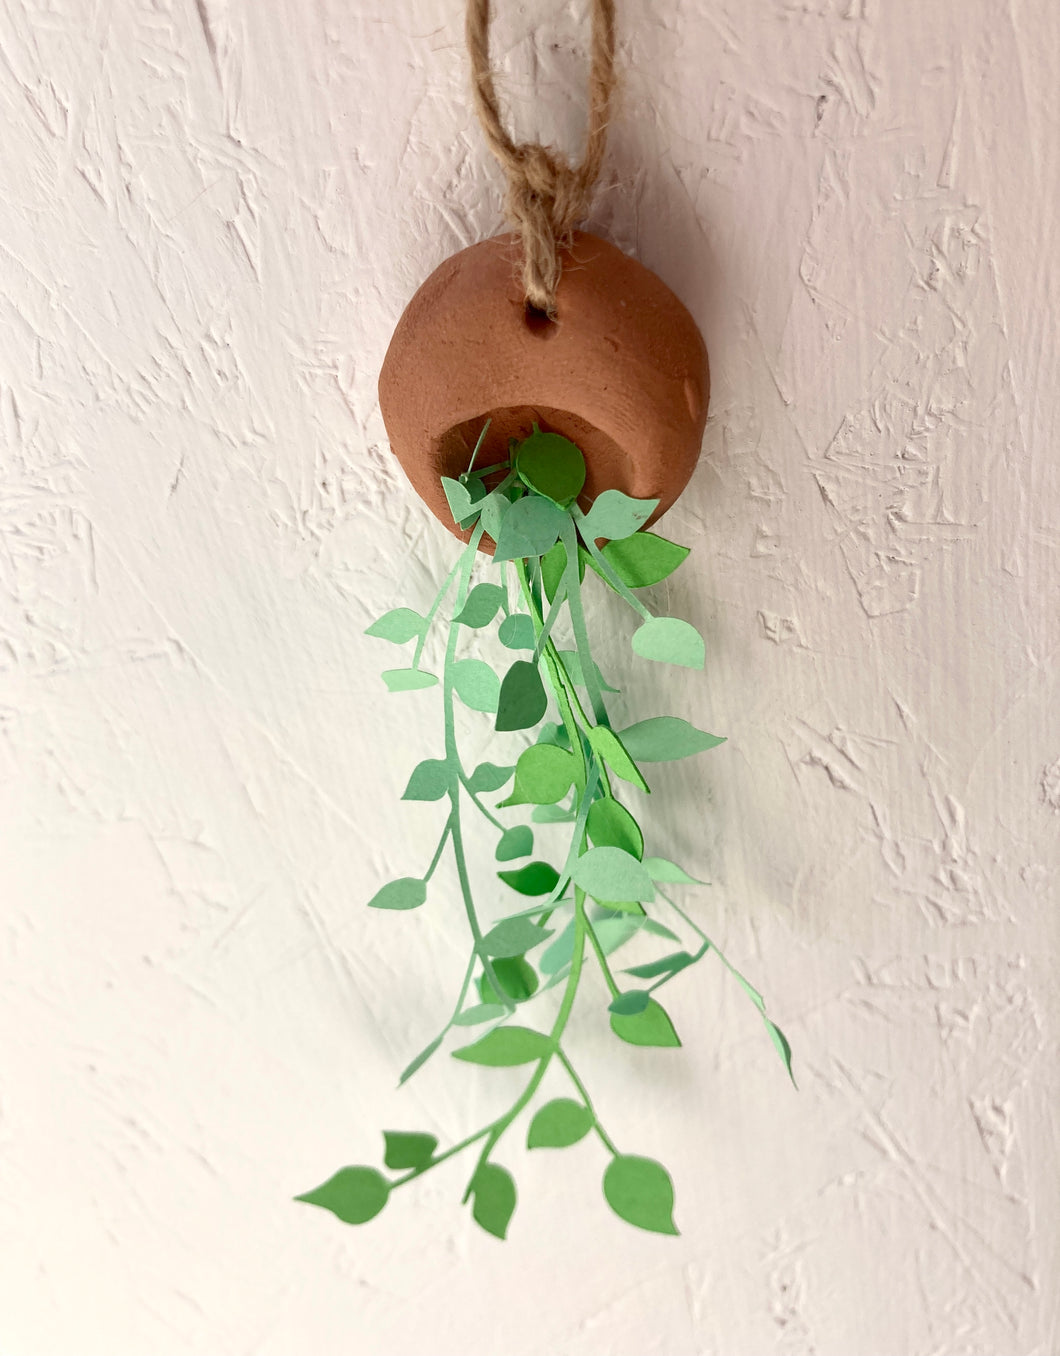 Trailing Paper Plant in hanging terracotta pot.